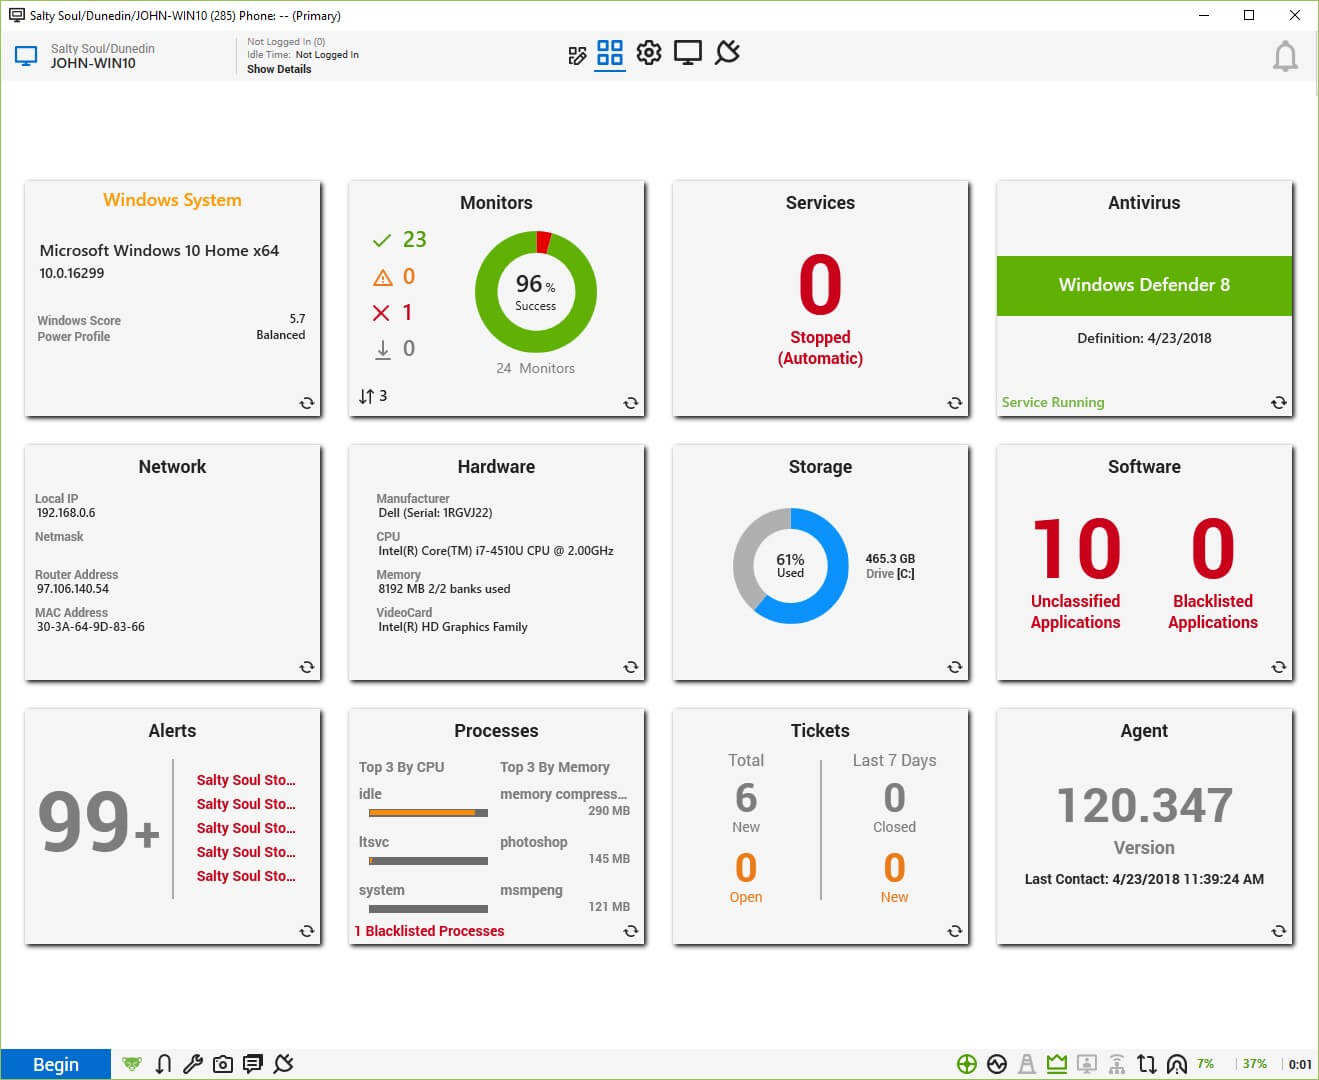 connectwise automate dashboard